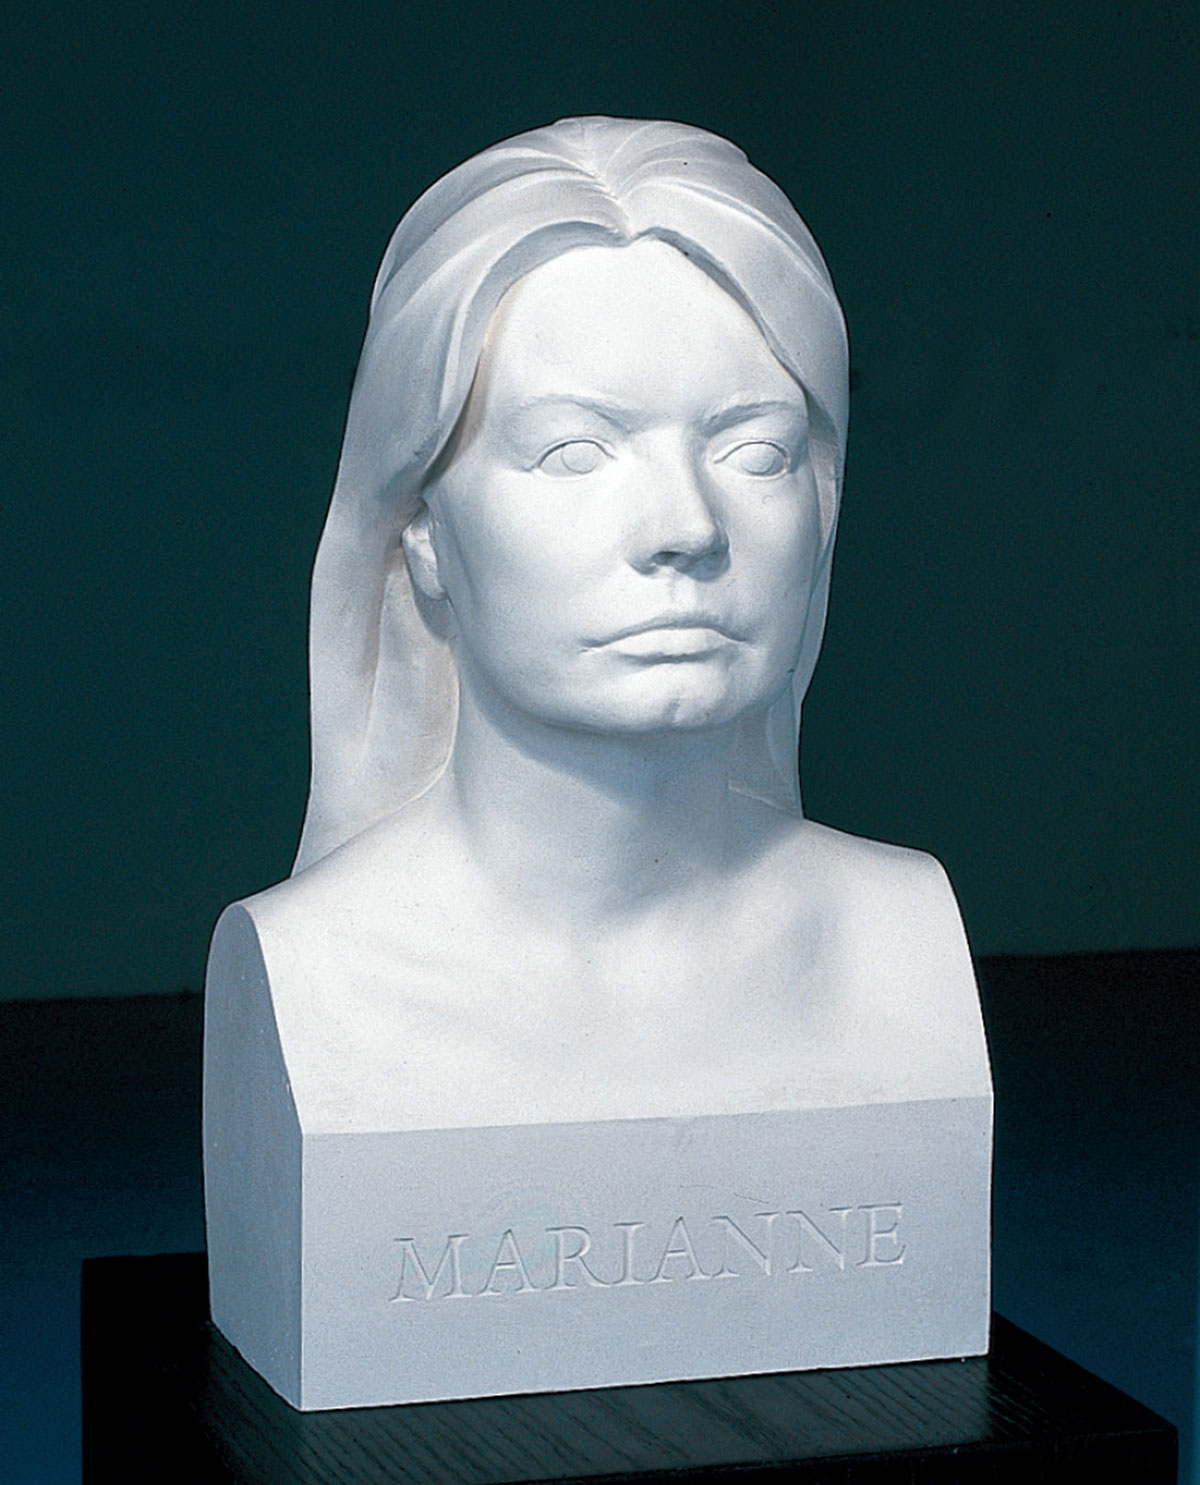 A photograph of the bust entitled “Marianne,” an average Swedish citizen.